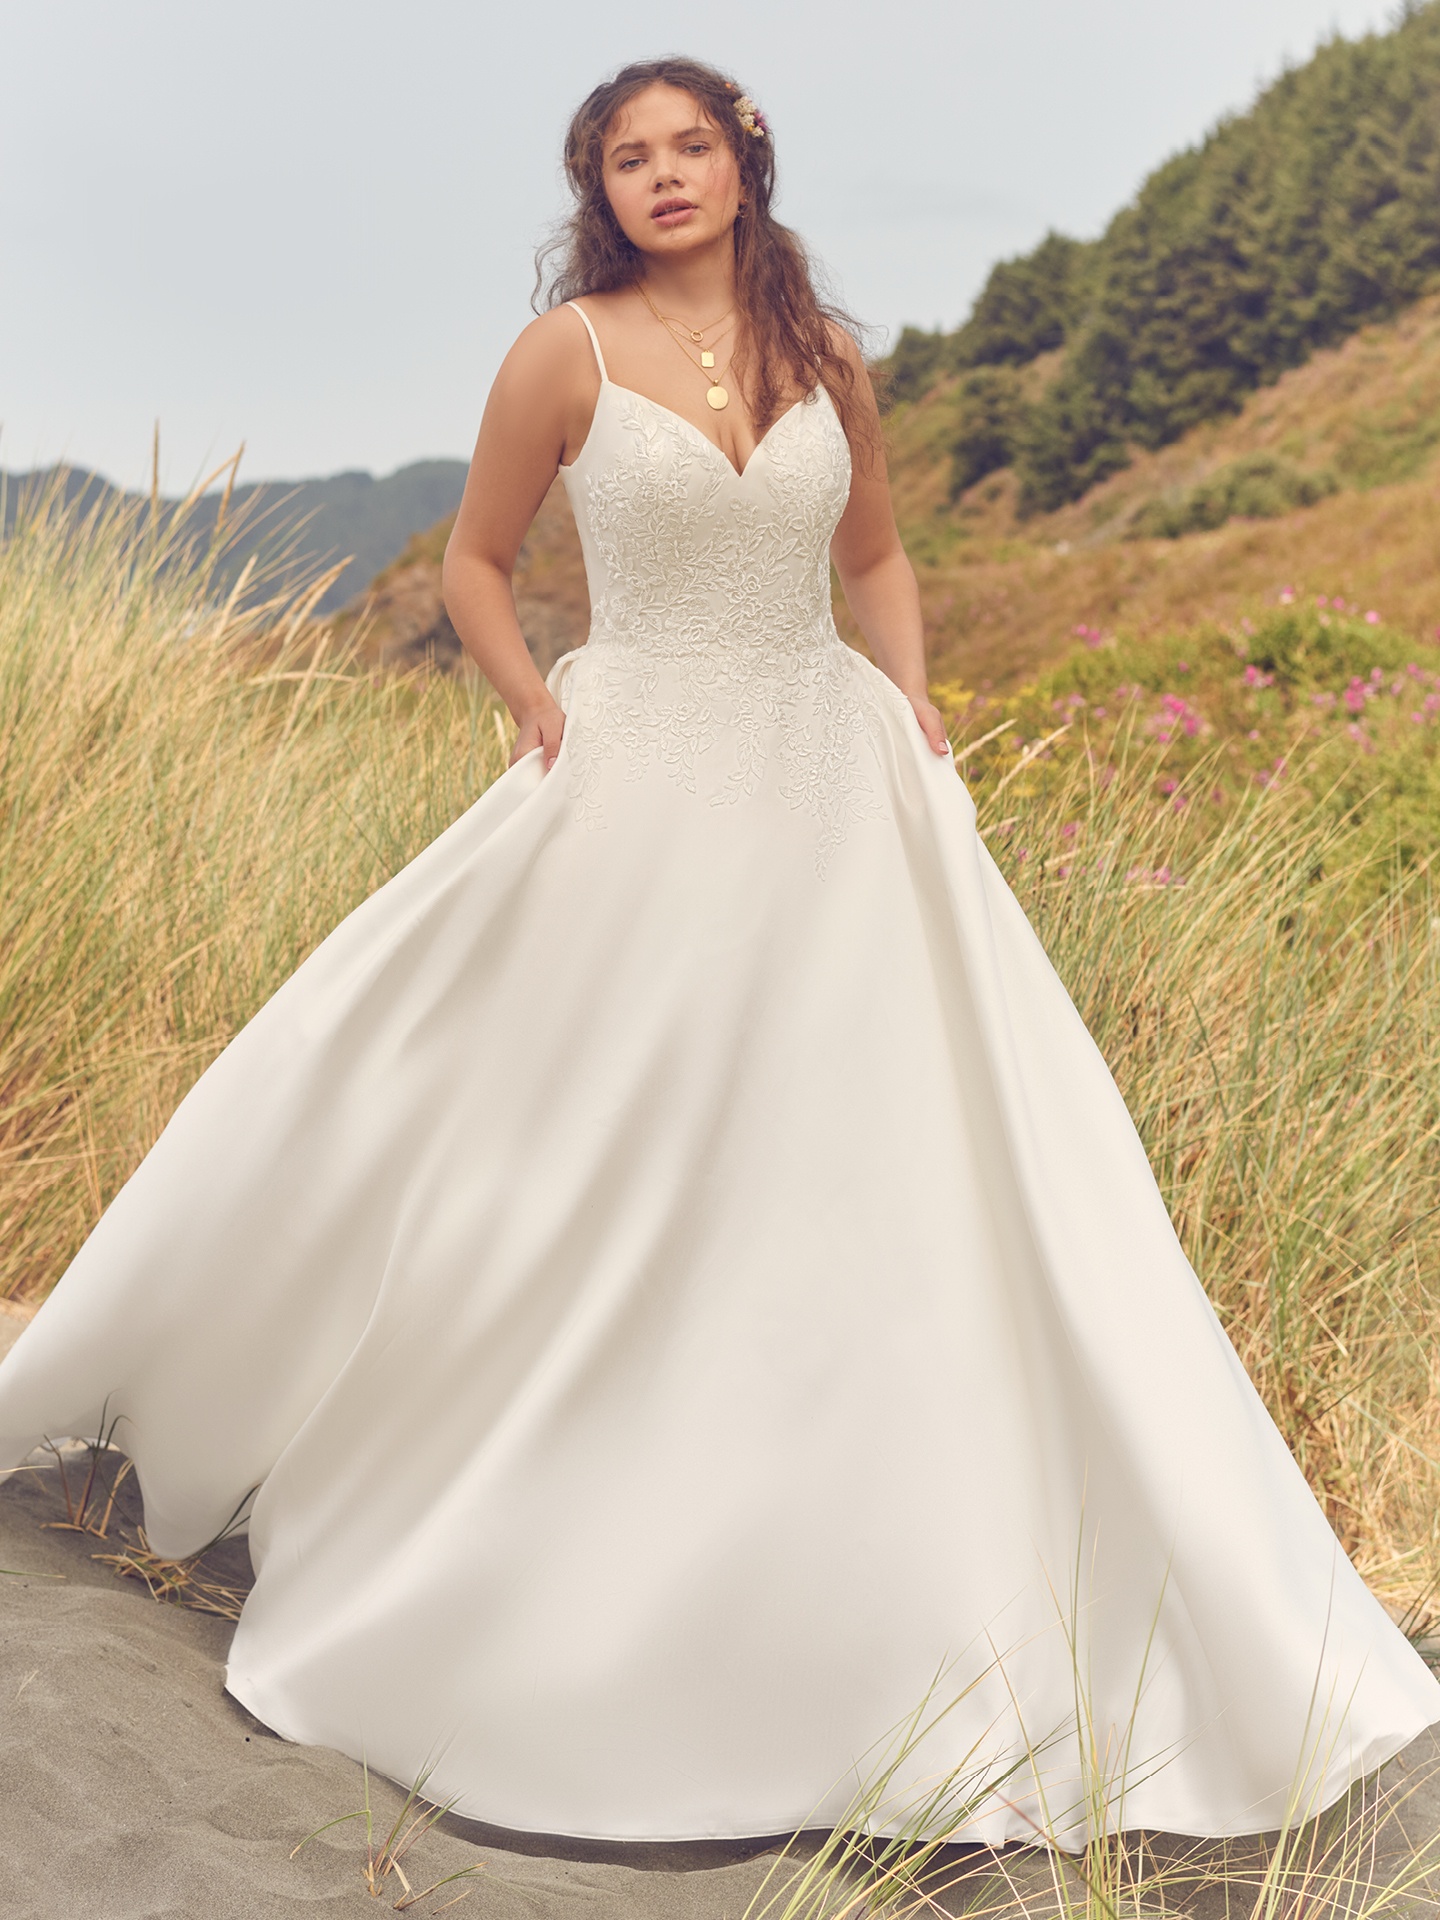 This modern satin ball gown with soft lace appliques is designed for wearability and swooshy sound effects. Available in All ivory sizes UK2-UK30